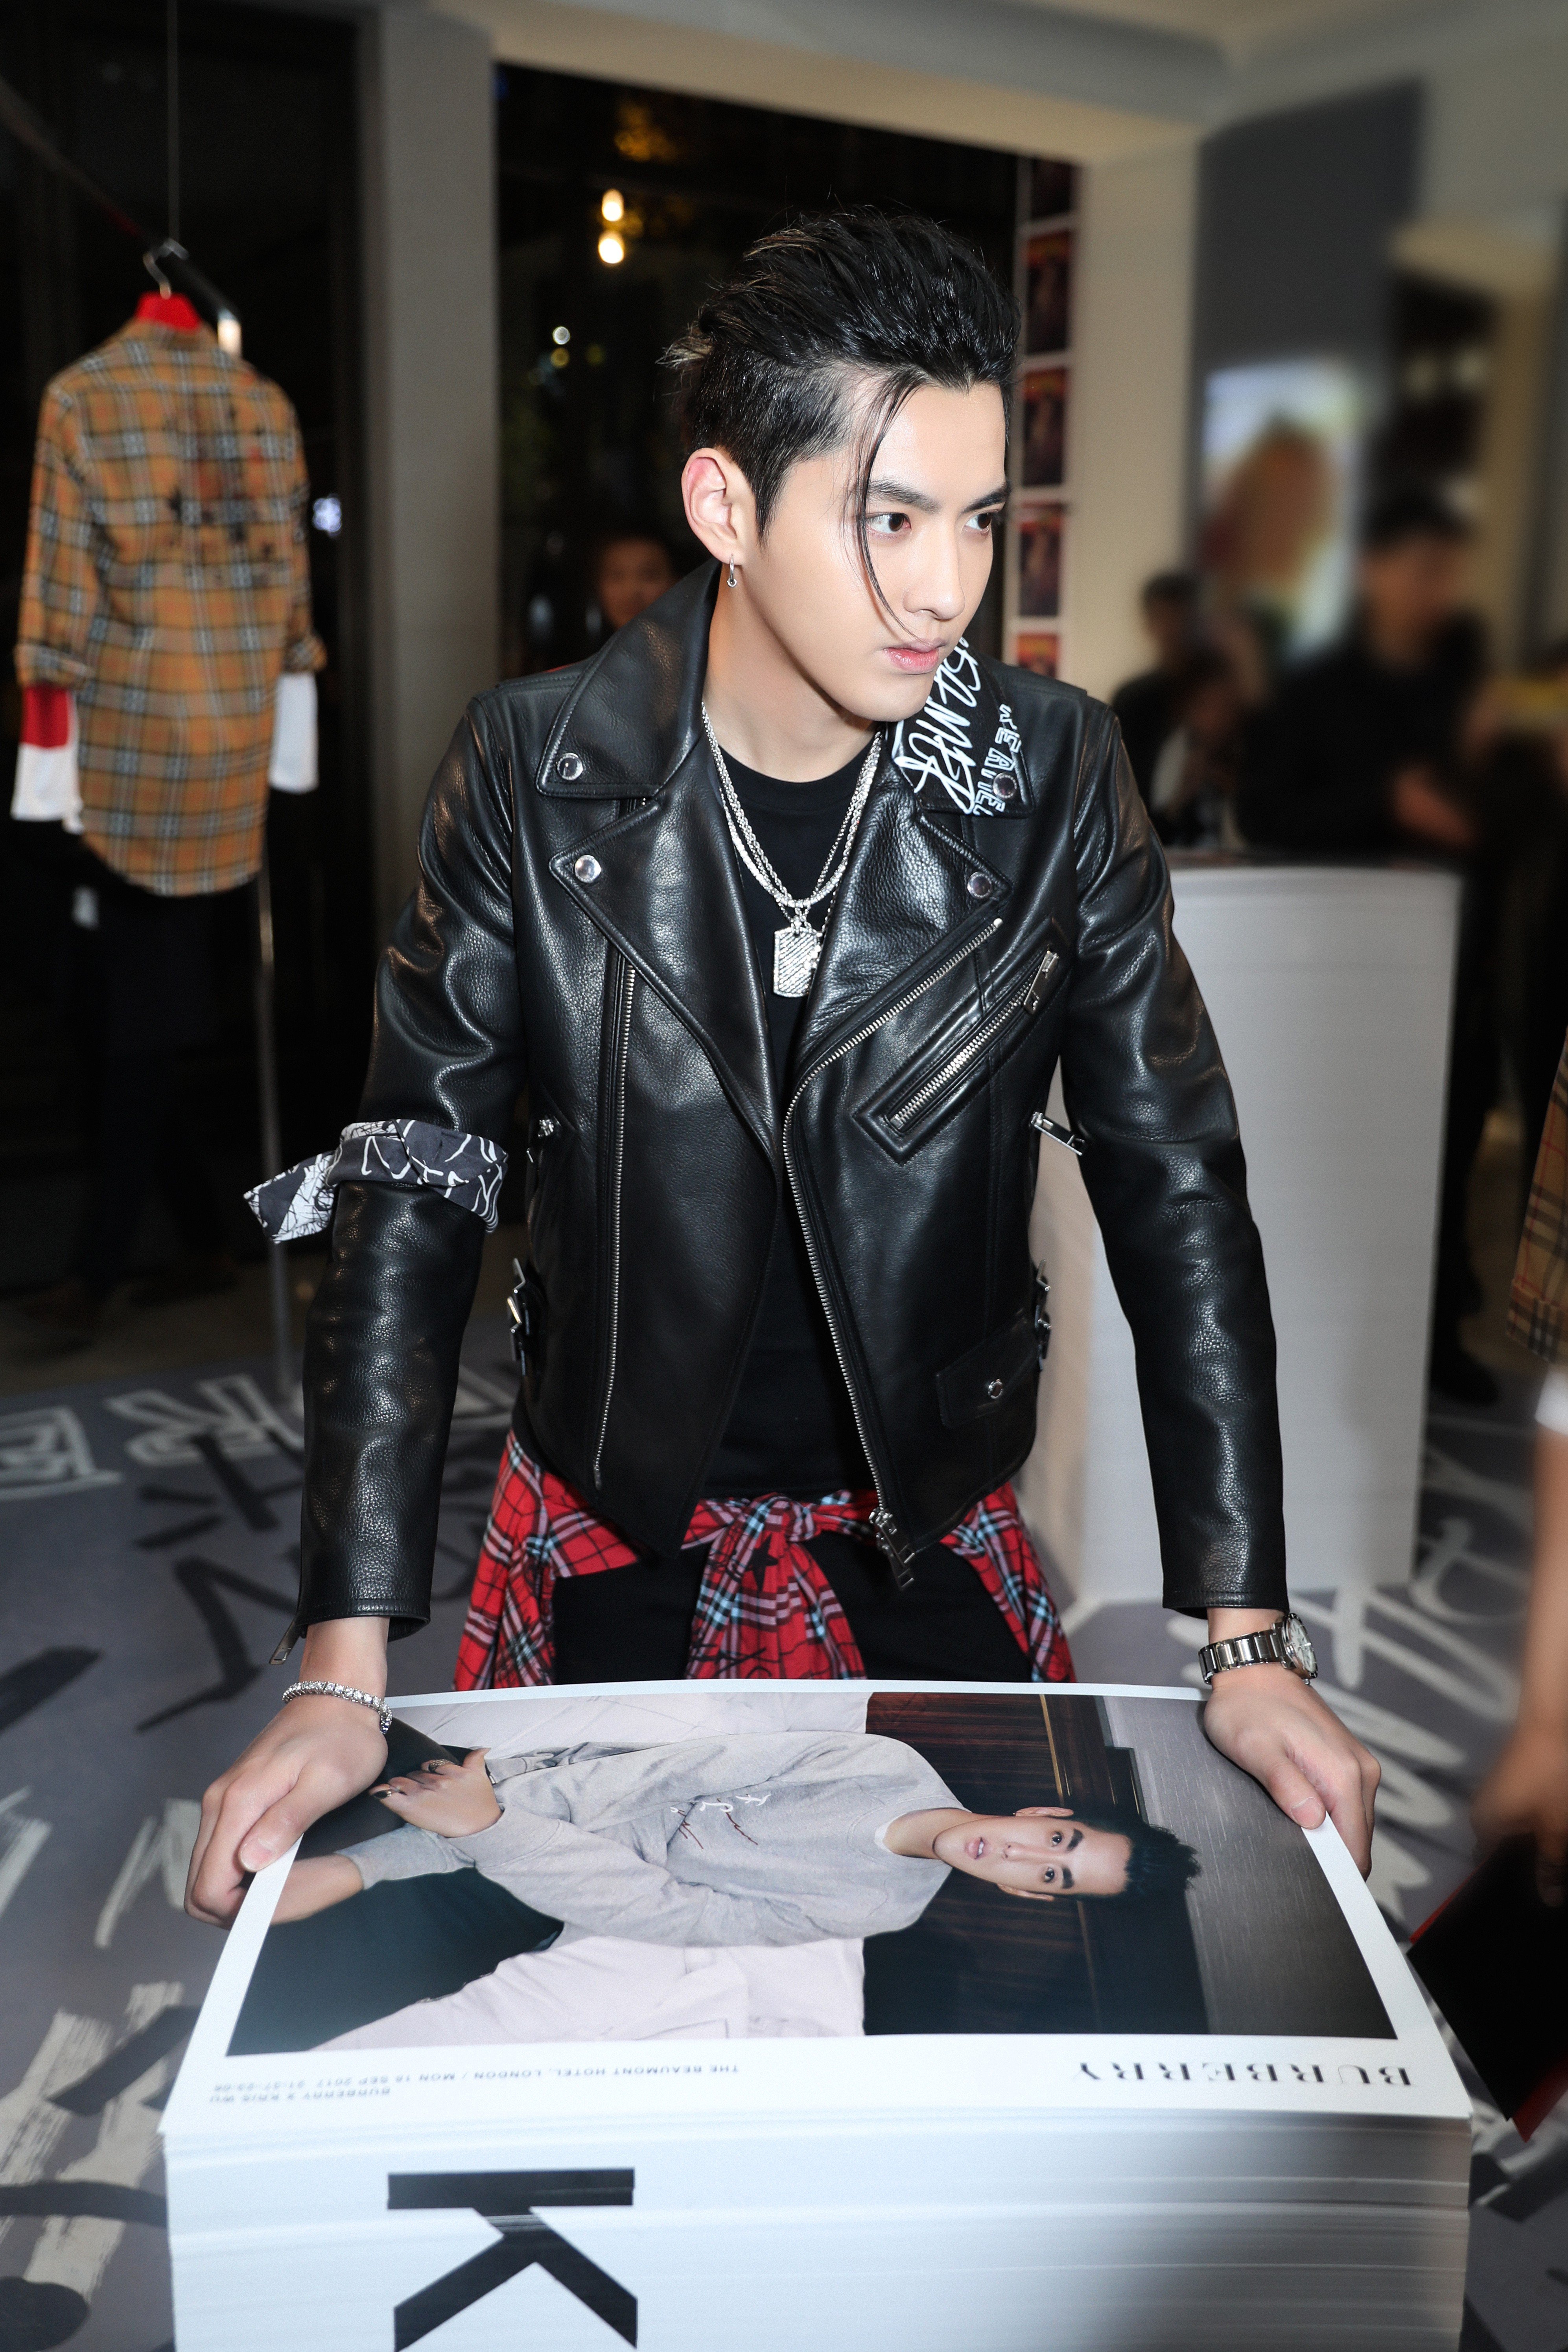 Burberry throws lavish Shanghai party second with Kris Wu | South China Morning Post